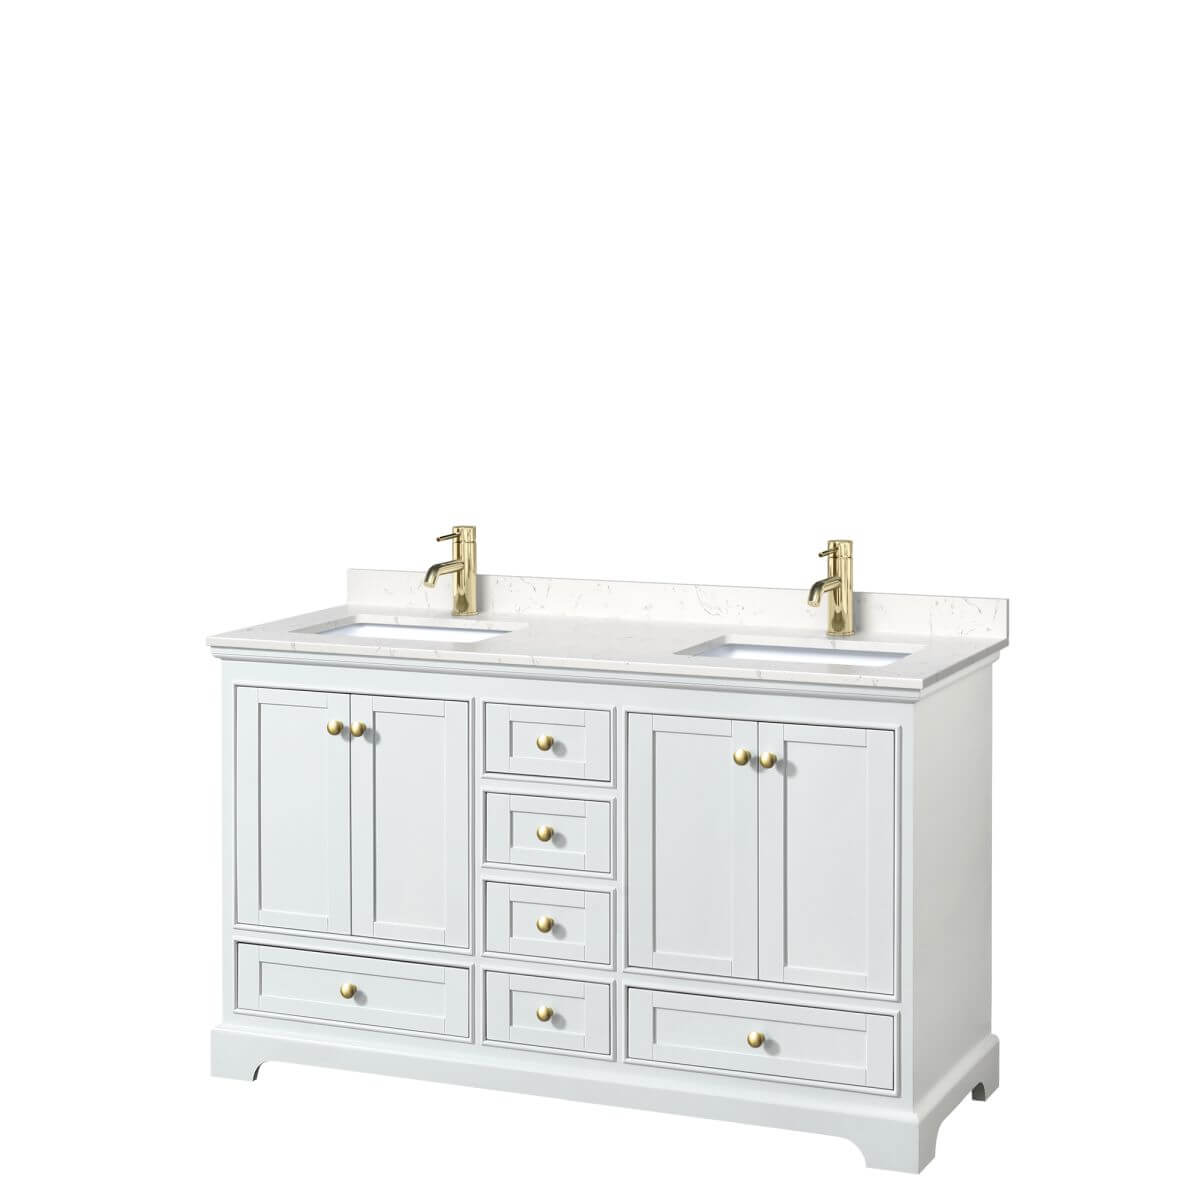 Wyndham Collection Deborah 60 inch Double Bathroom Vanity in White with Carrara Cultured Marble Countertop, Undermount Square Sinks, Brushed Gold Trim and No Mirrors - WCS202060DWGC2UNSMXX